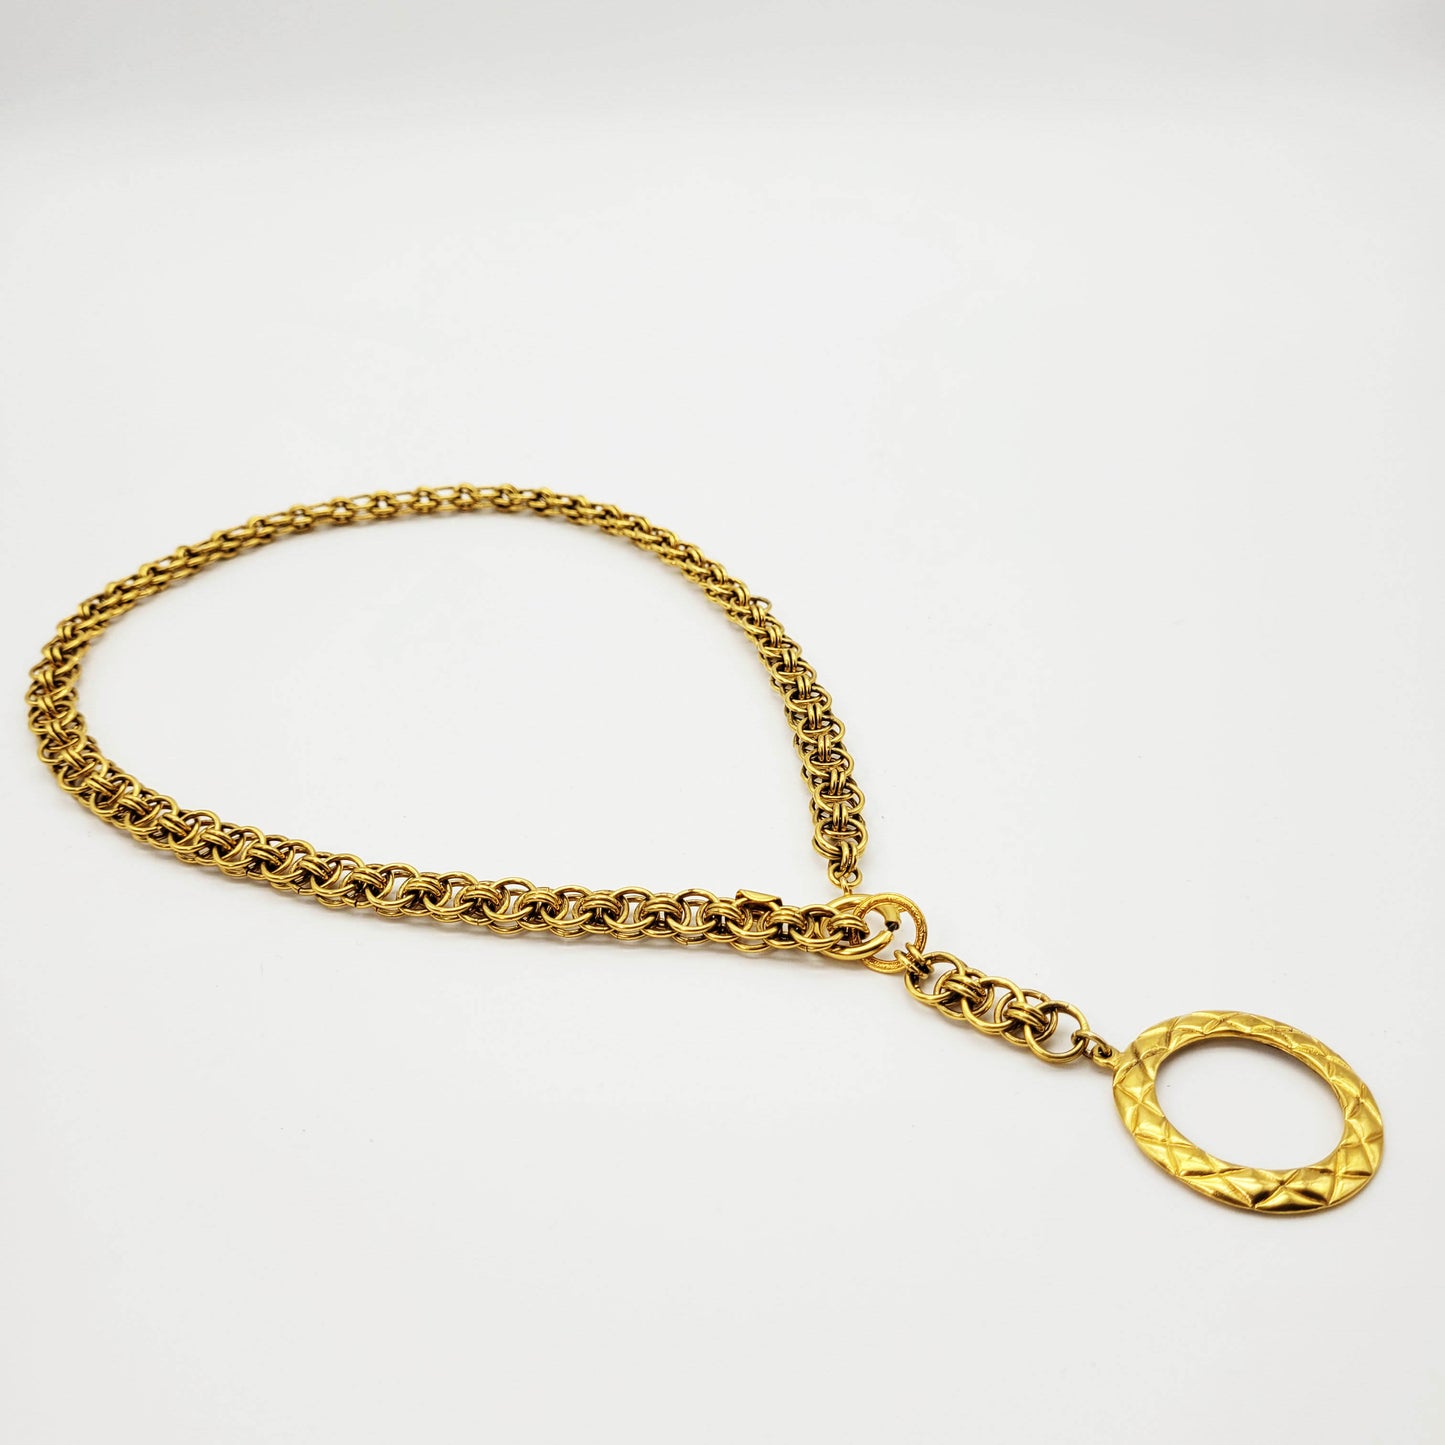 Vintage chain necklace Chanel